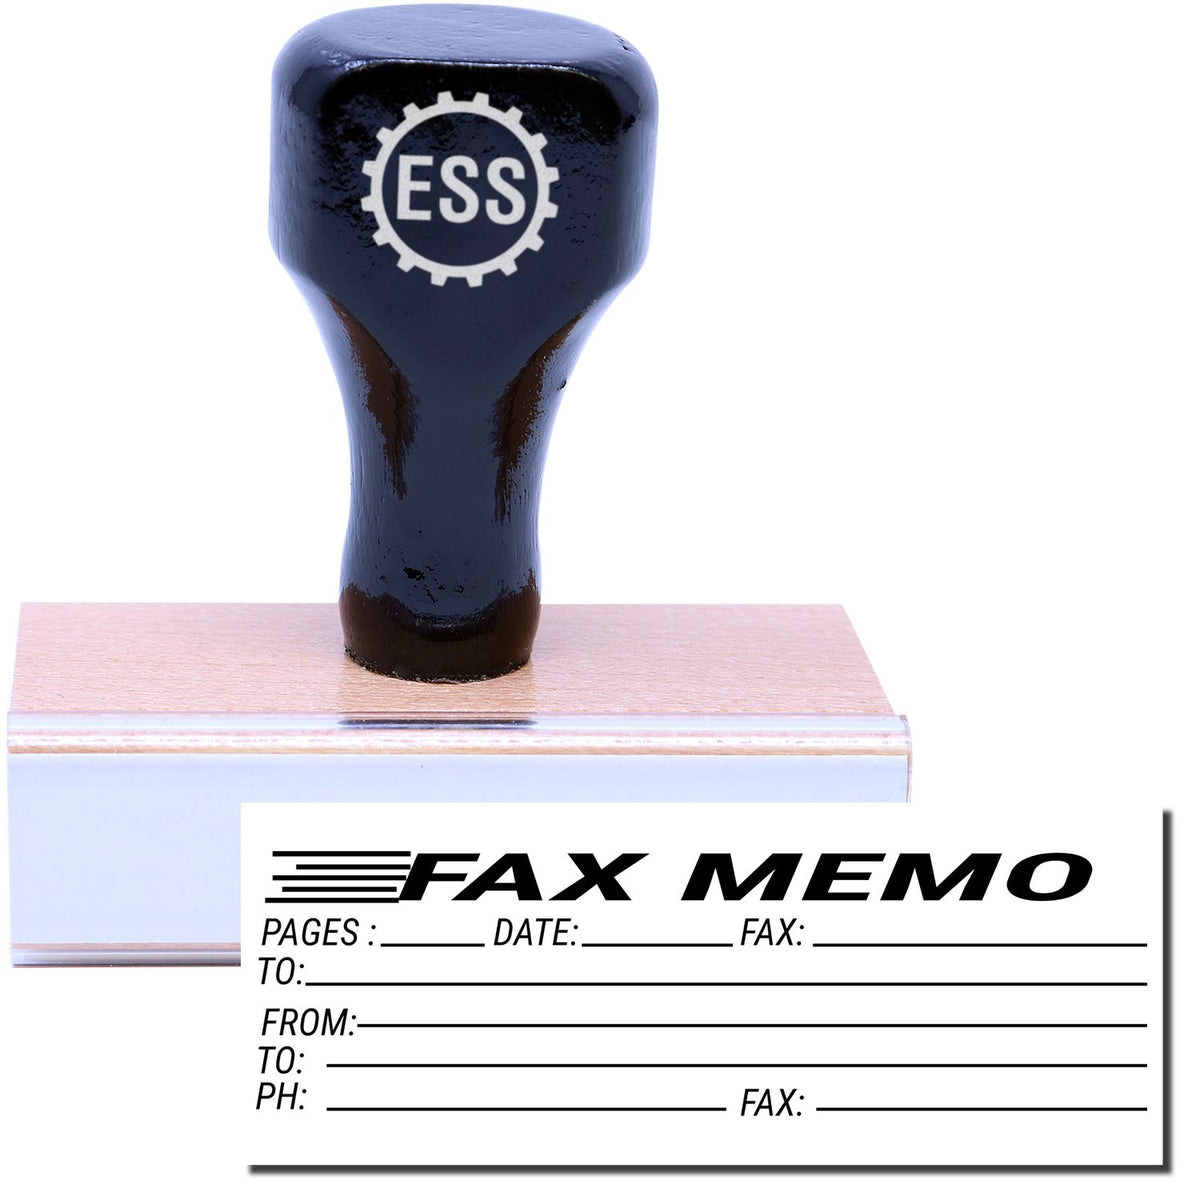 A stock office rubber stamp with a stamped image showing how the text &quot;FAX MEMO&quot; in a large font with spaces underneath to indicate the number of pages, date, fax information, and who the fax is being sent to is displayed after stamping.